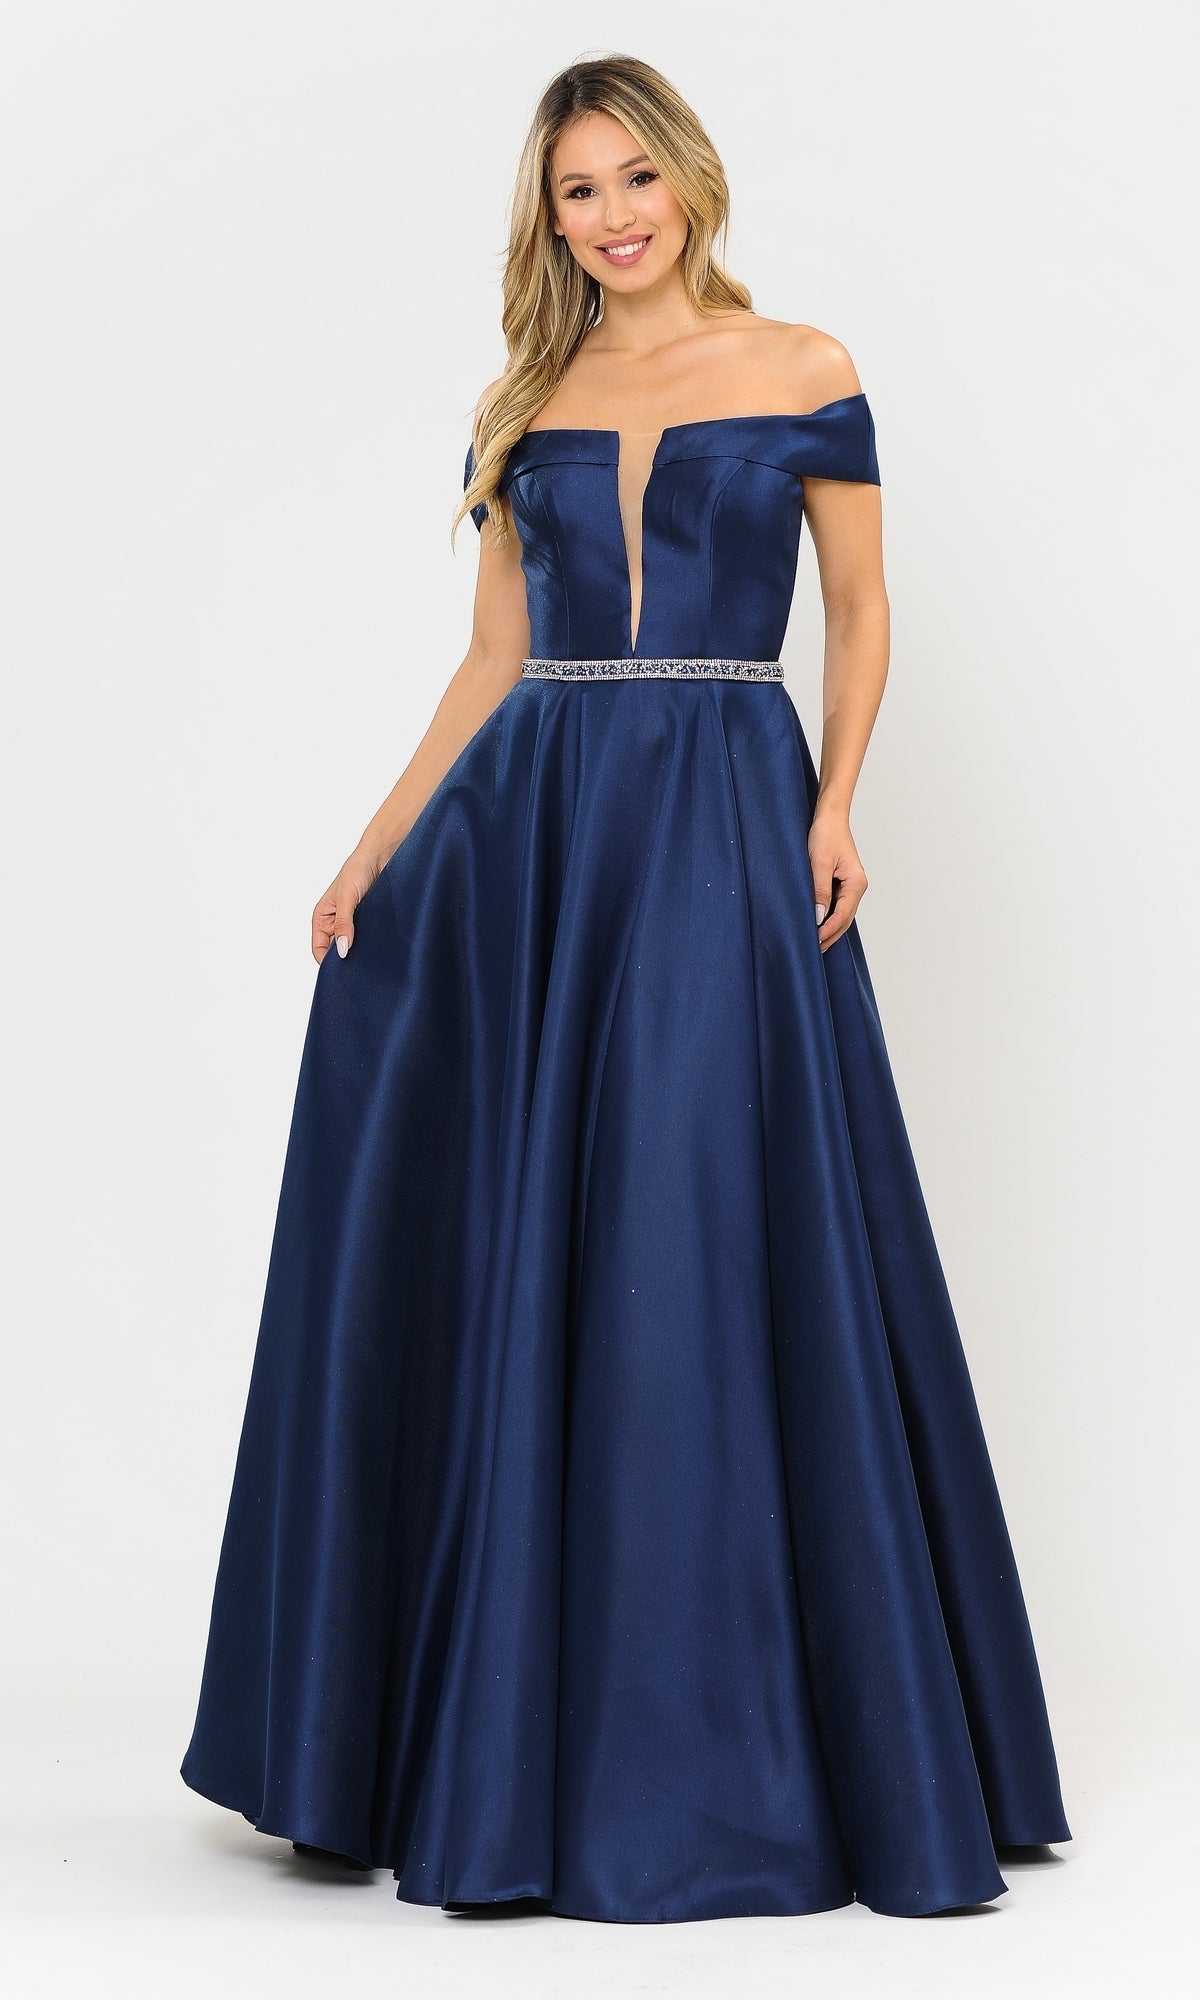 Plunging V-Neck Long Mikado Prom Ball Gown 8680